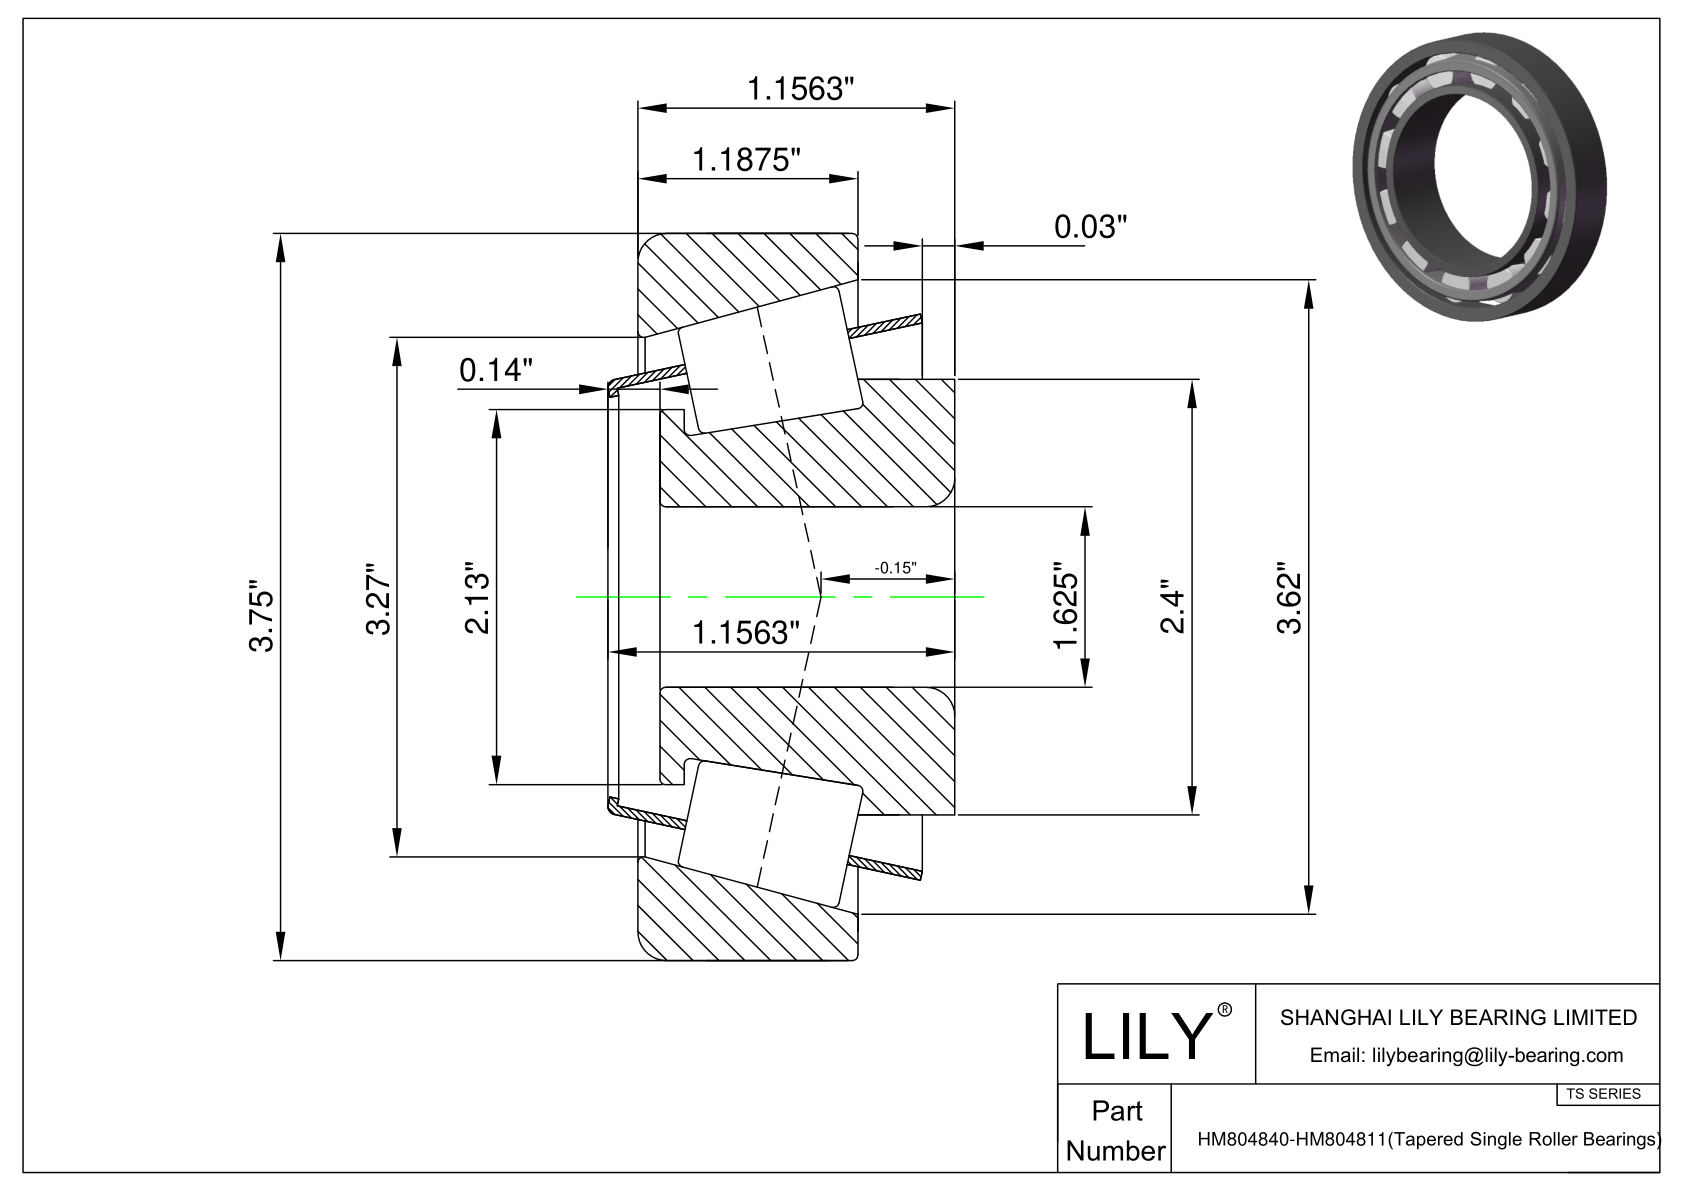 HM804840-HM804811 TS (Tapered Single Roller Bearings) (Imperial) cad drawing